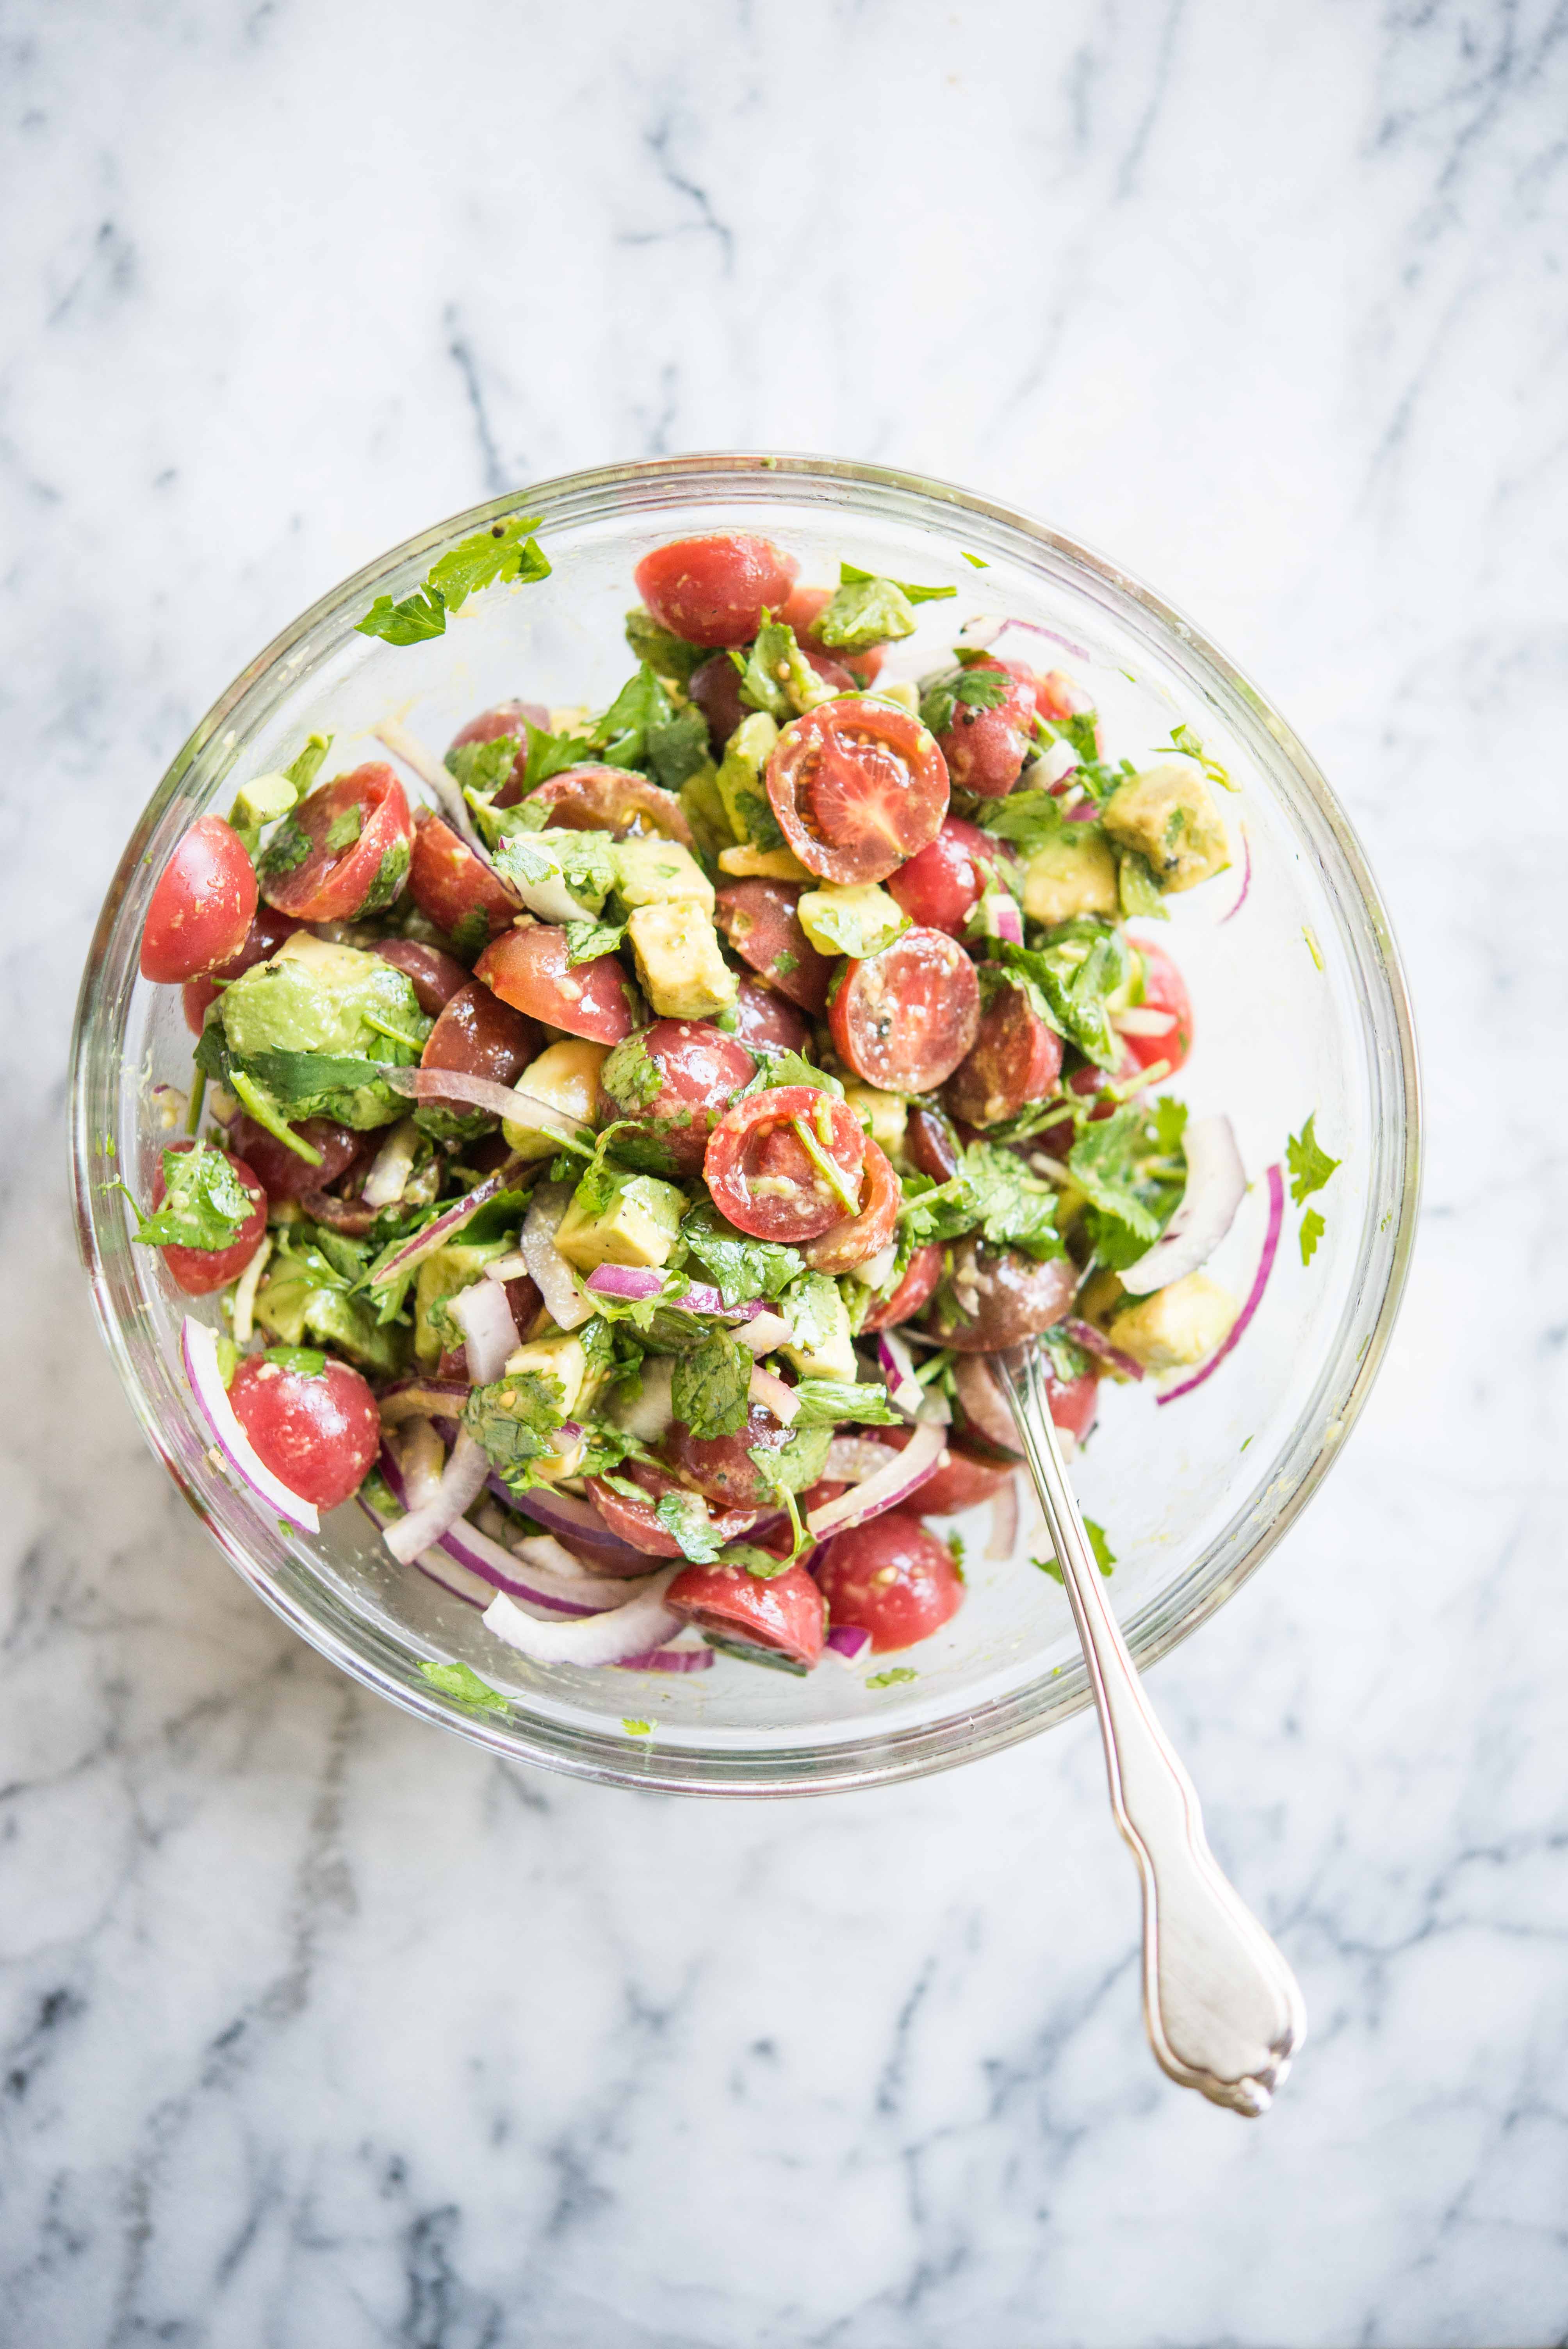 tomatoes, diced avocado, sliced red onion, and cilantro in a glass bowl on a marble countertop